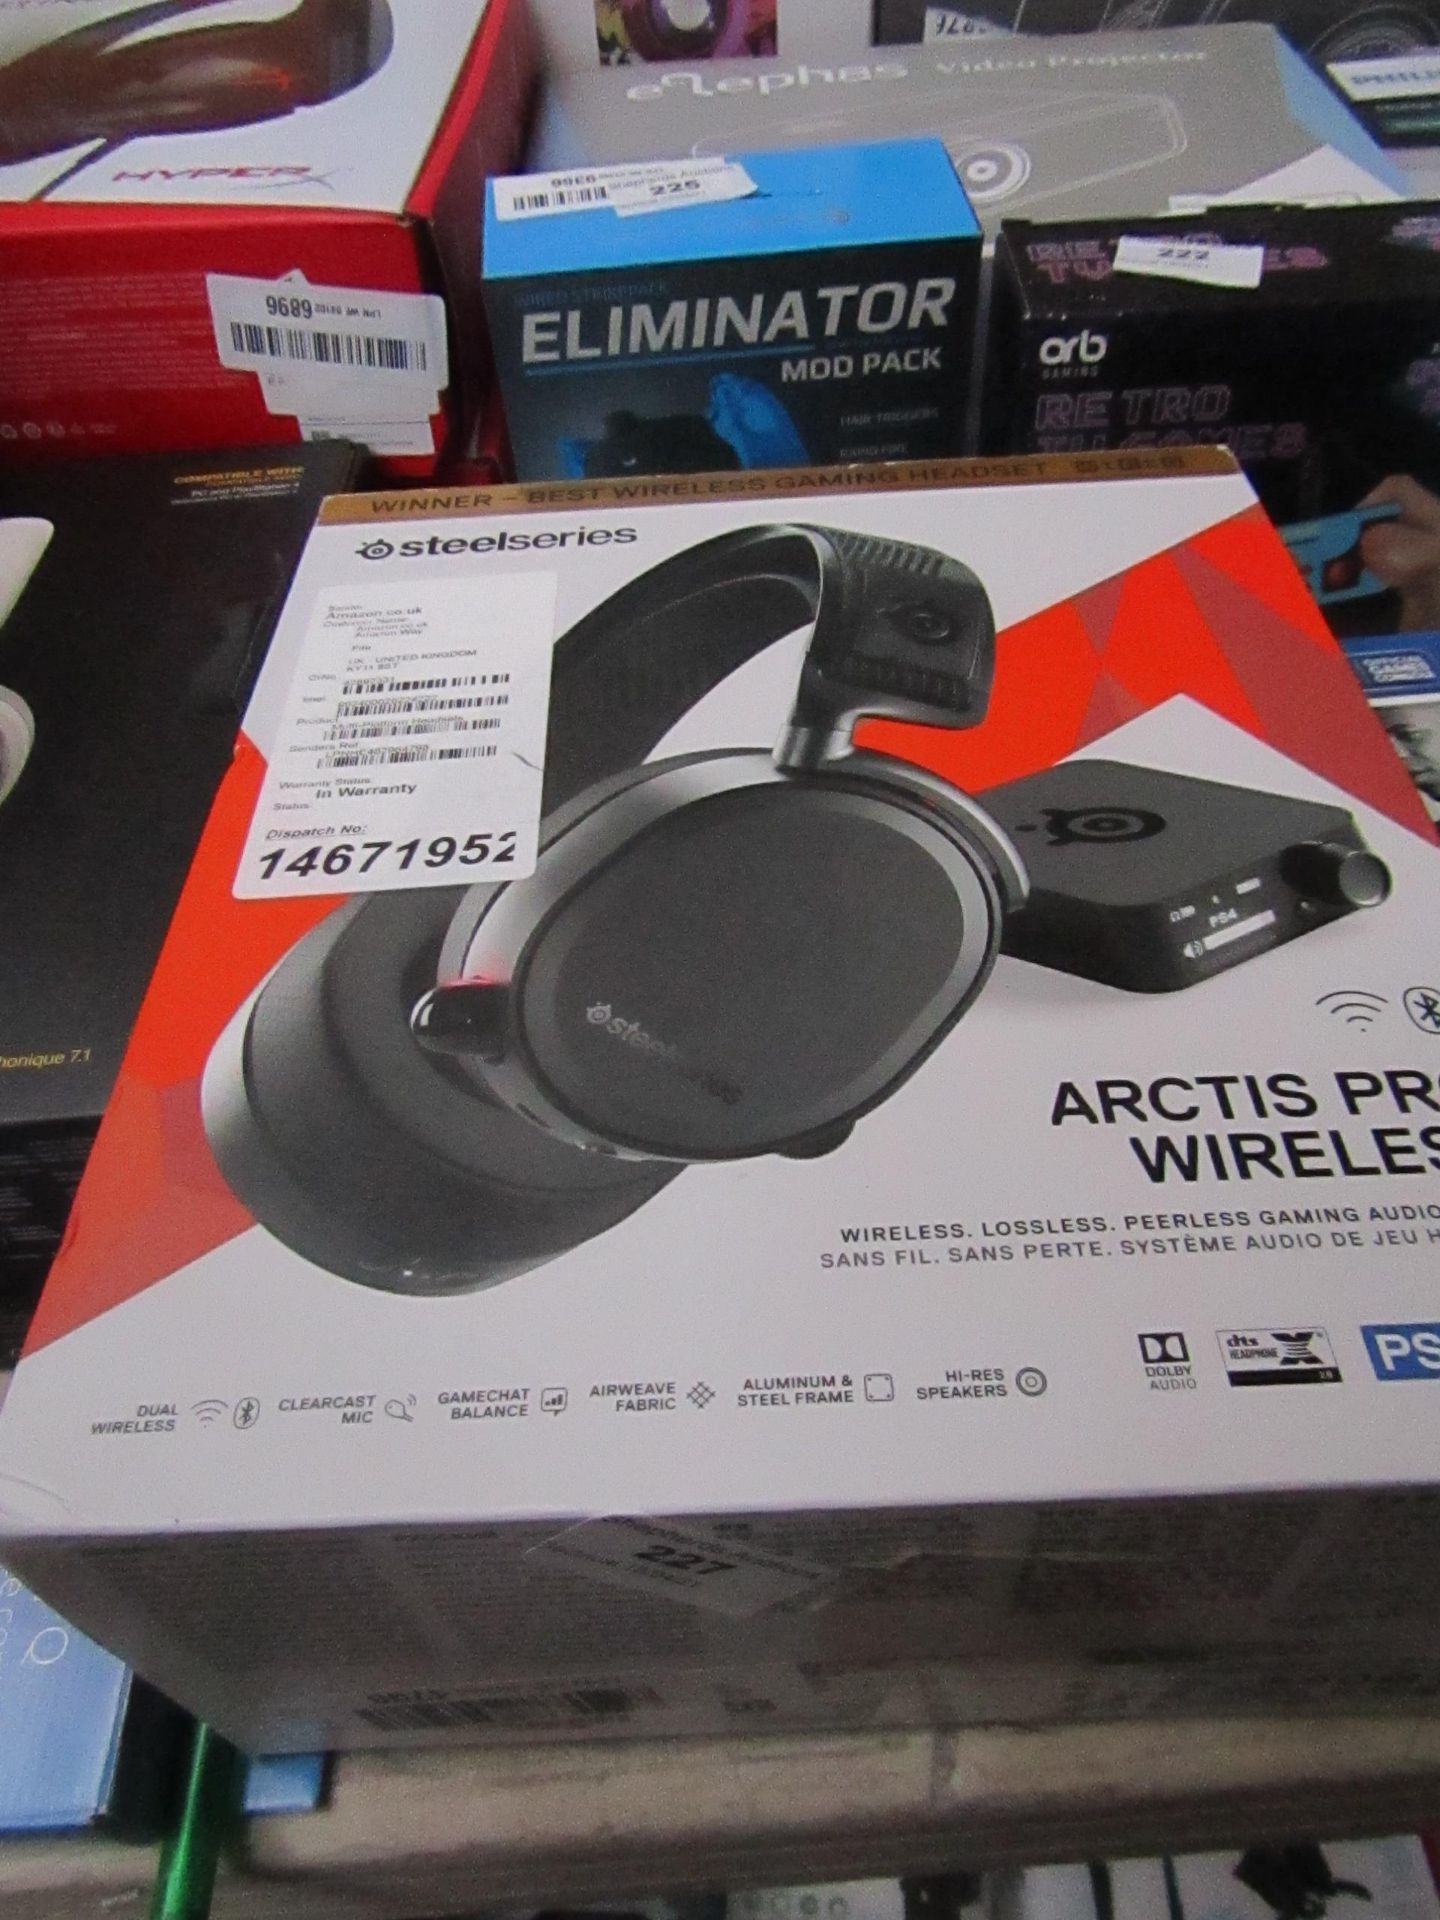 SteelSeries - Arctis pro Wireless PS4/PC Gaming Audio System - Unchecked & Boxed.